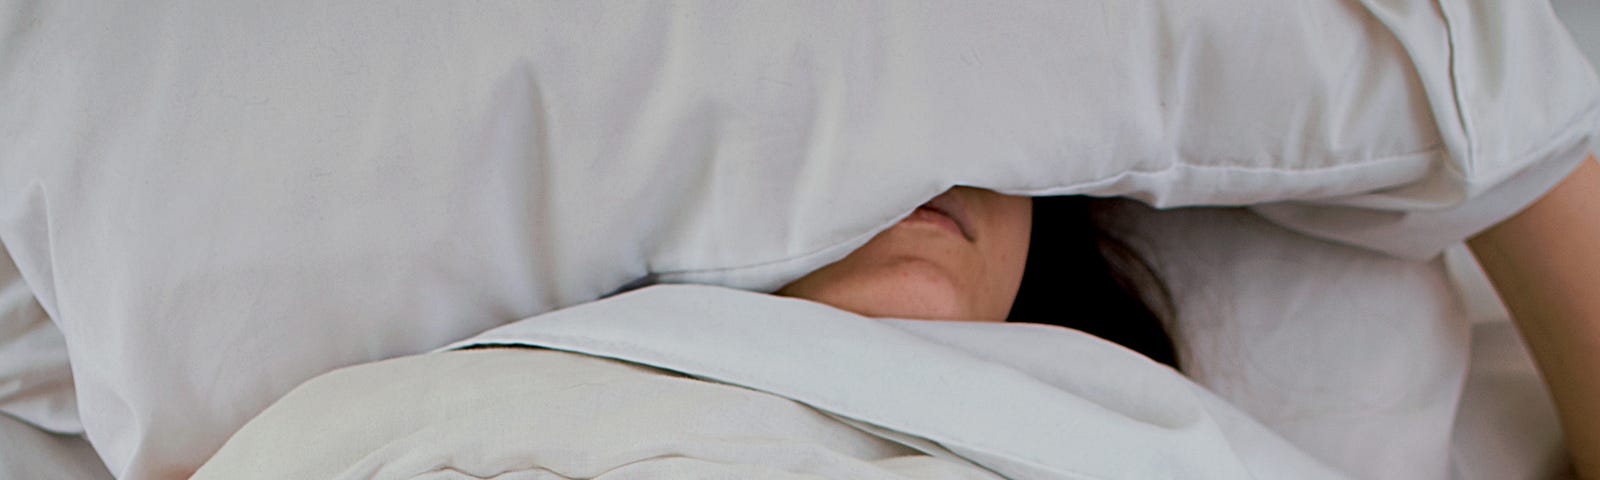 A girl is in bed, covering her head with a pillow. The blankets are pulled up to her chin, and she is holding her glasses in her other hand